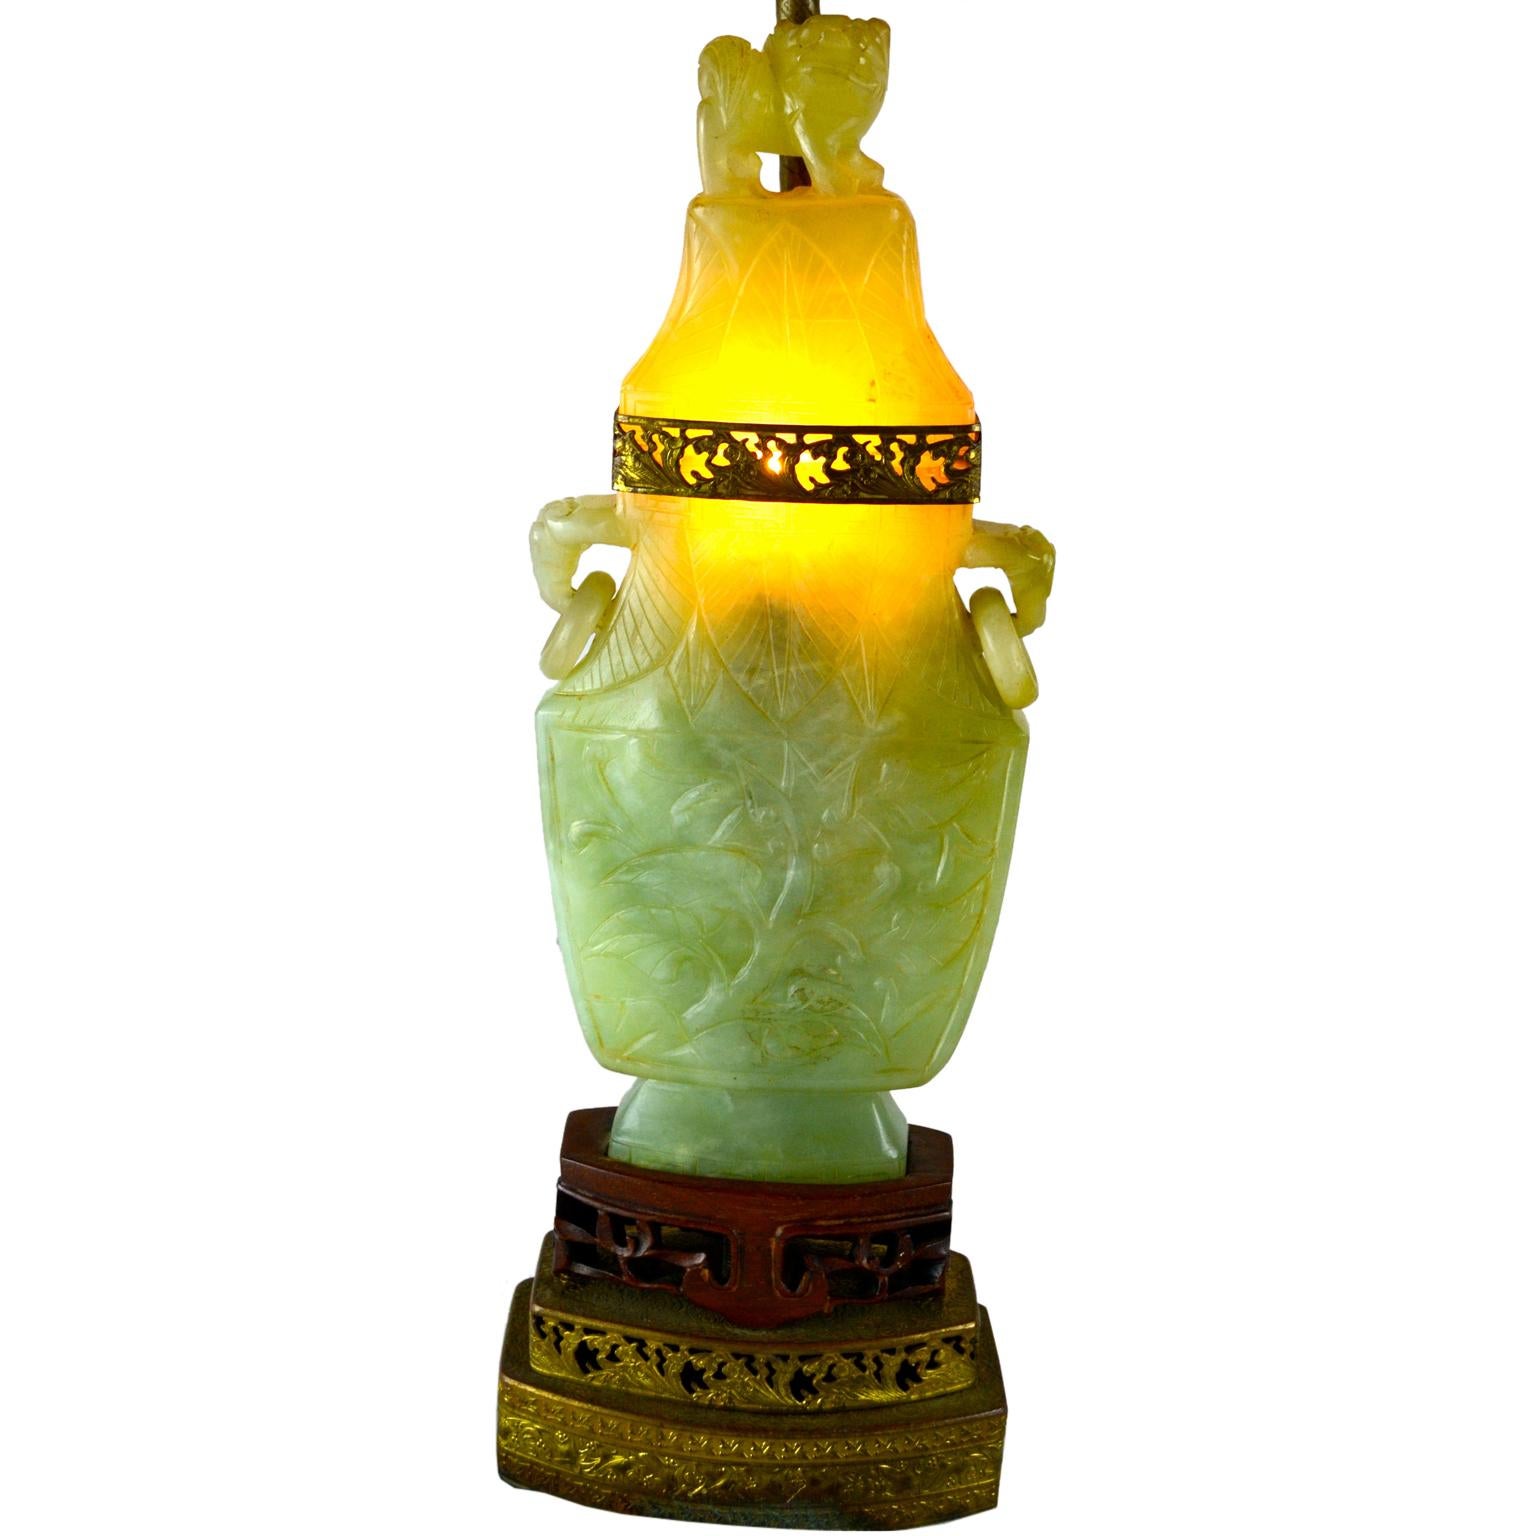 The stone bodies of this type of interior illuminated lamp are often referred to as quartz, jadeite or even jade but are in fact of the fluorite family, a softer stone more easily carved. The hollow urn bodies with ring handles are carved all around